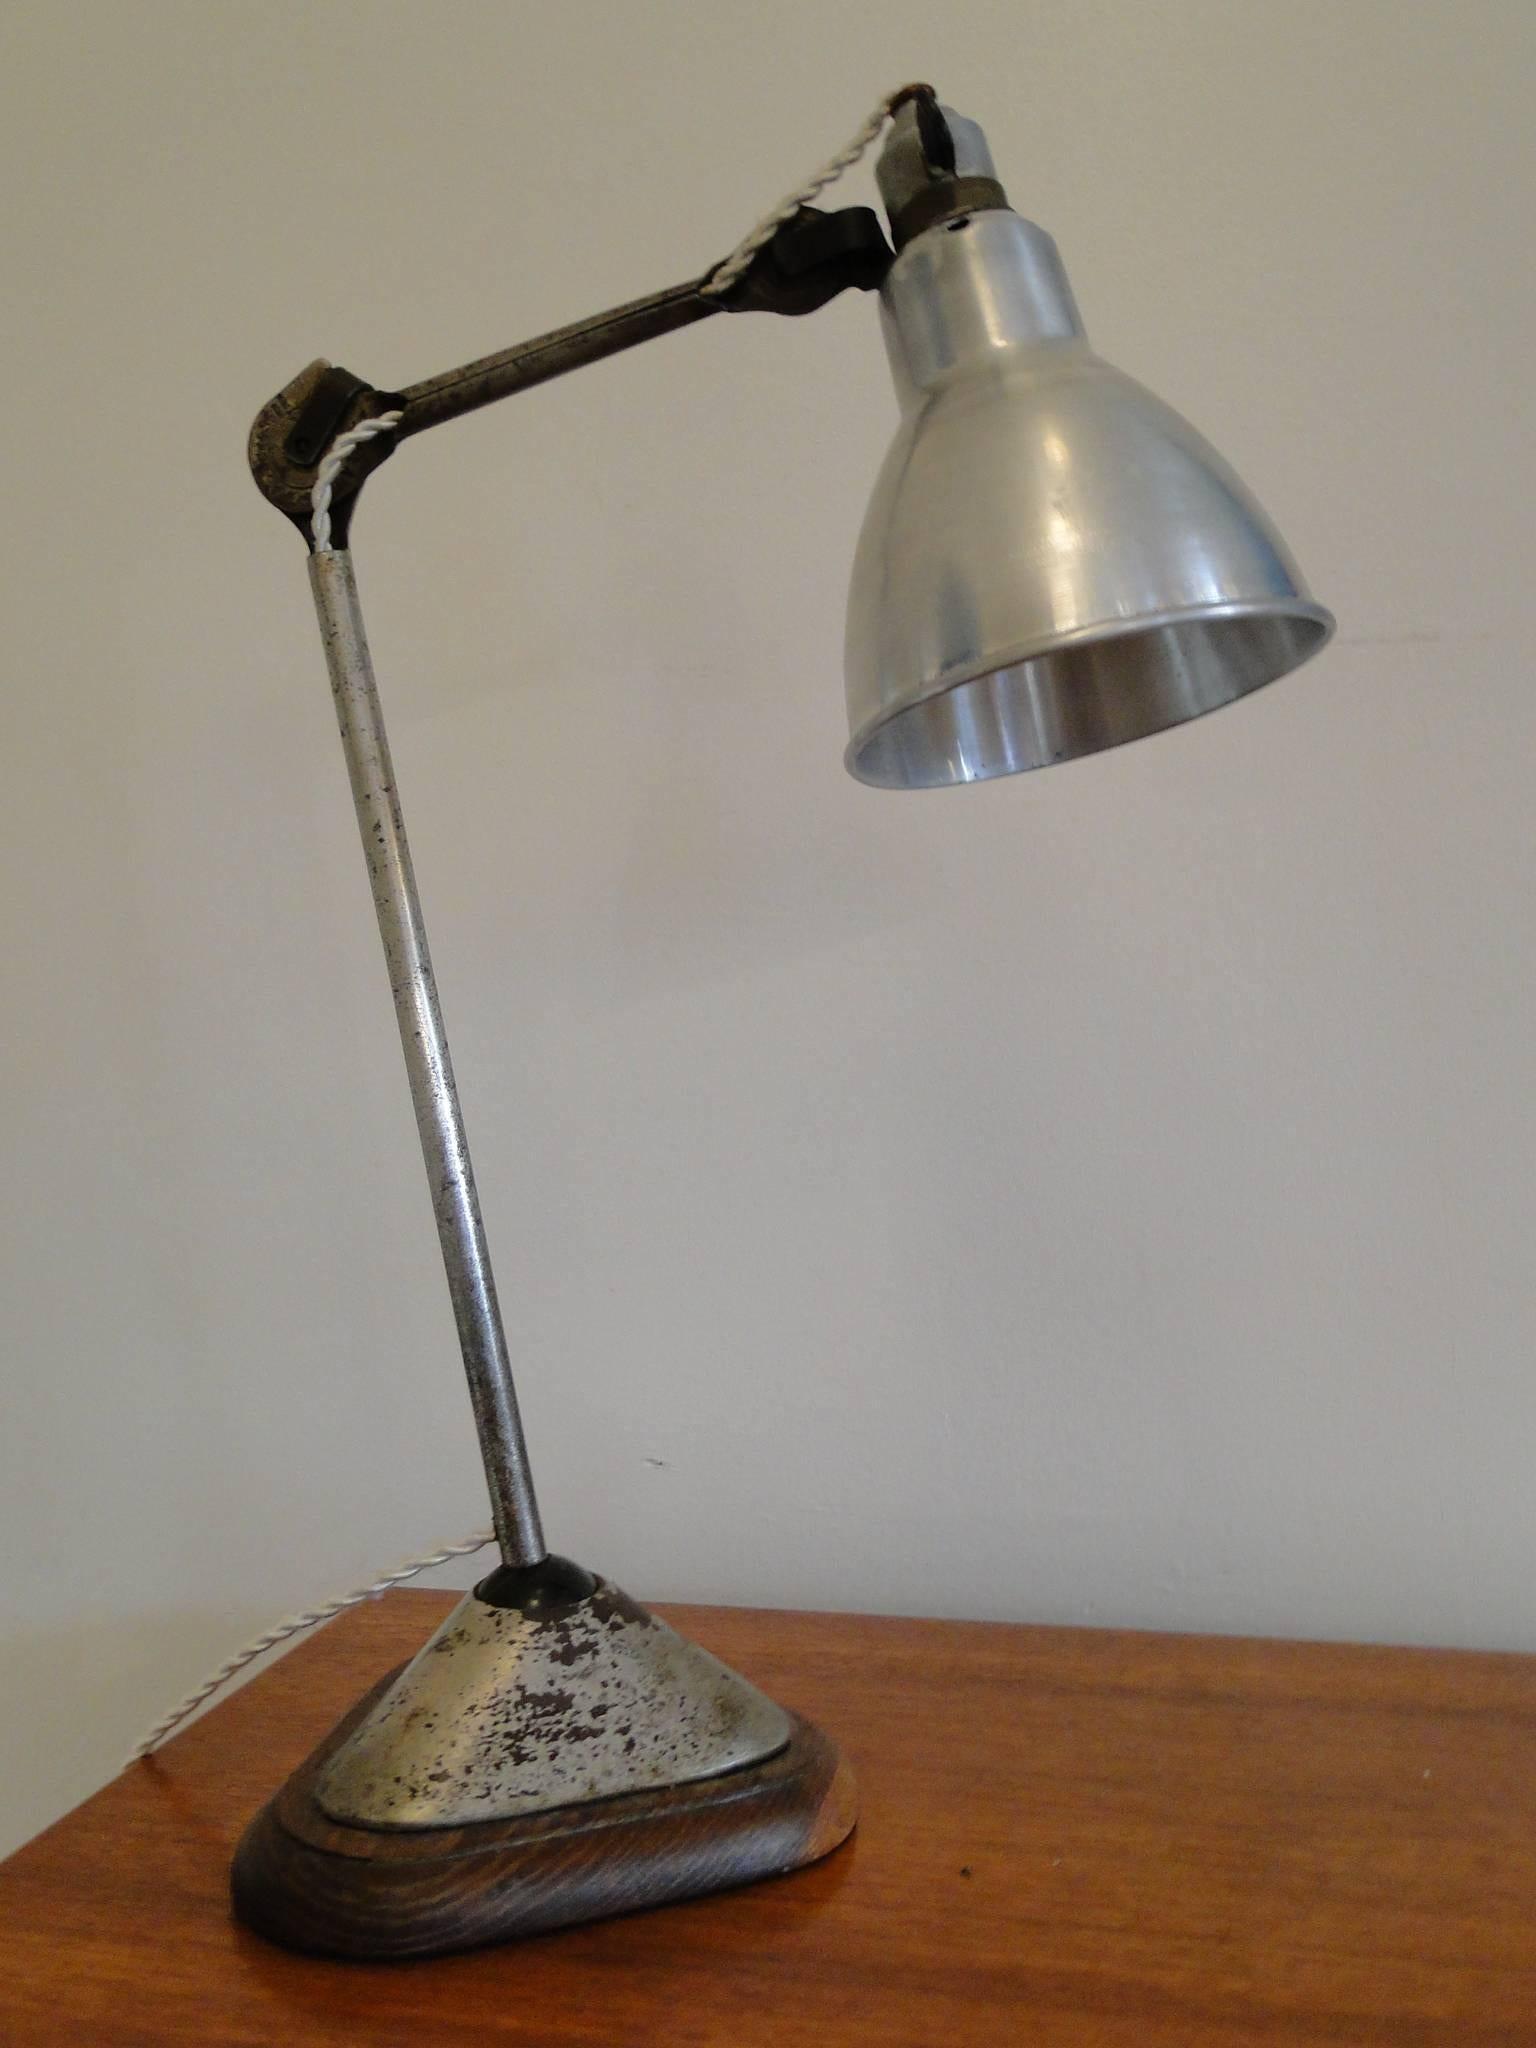 This specific lamp on sale was hand-picked in the north of France, this is the 206 model which was manufactured in the late 1930s and absolutely all parts and hardware are genuine.
The lamp was carefully restored and checked, it is fully functional